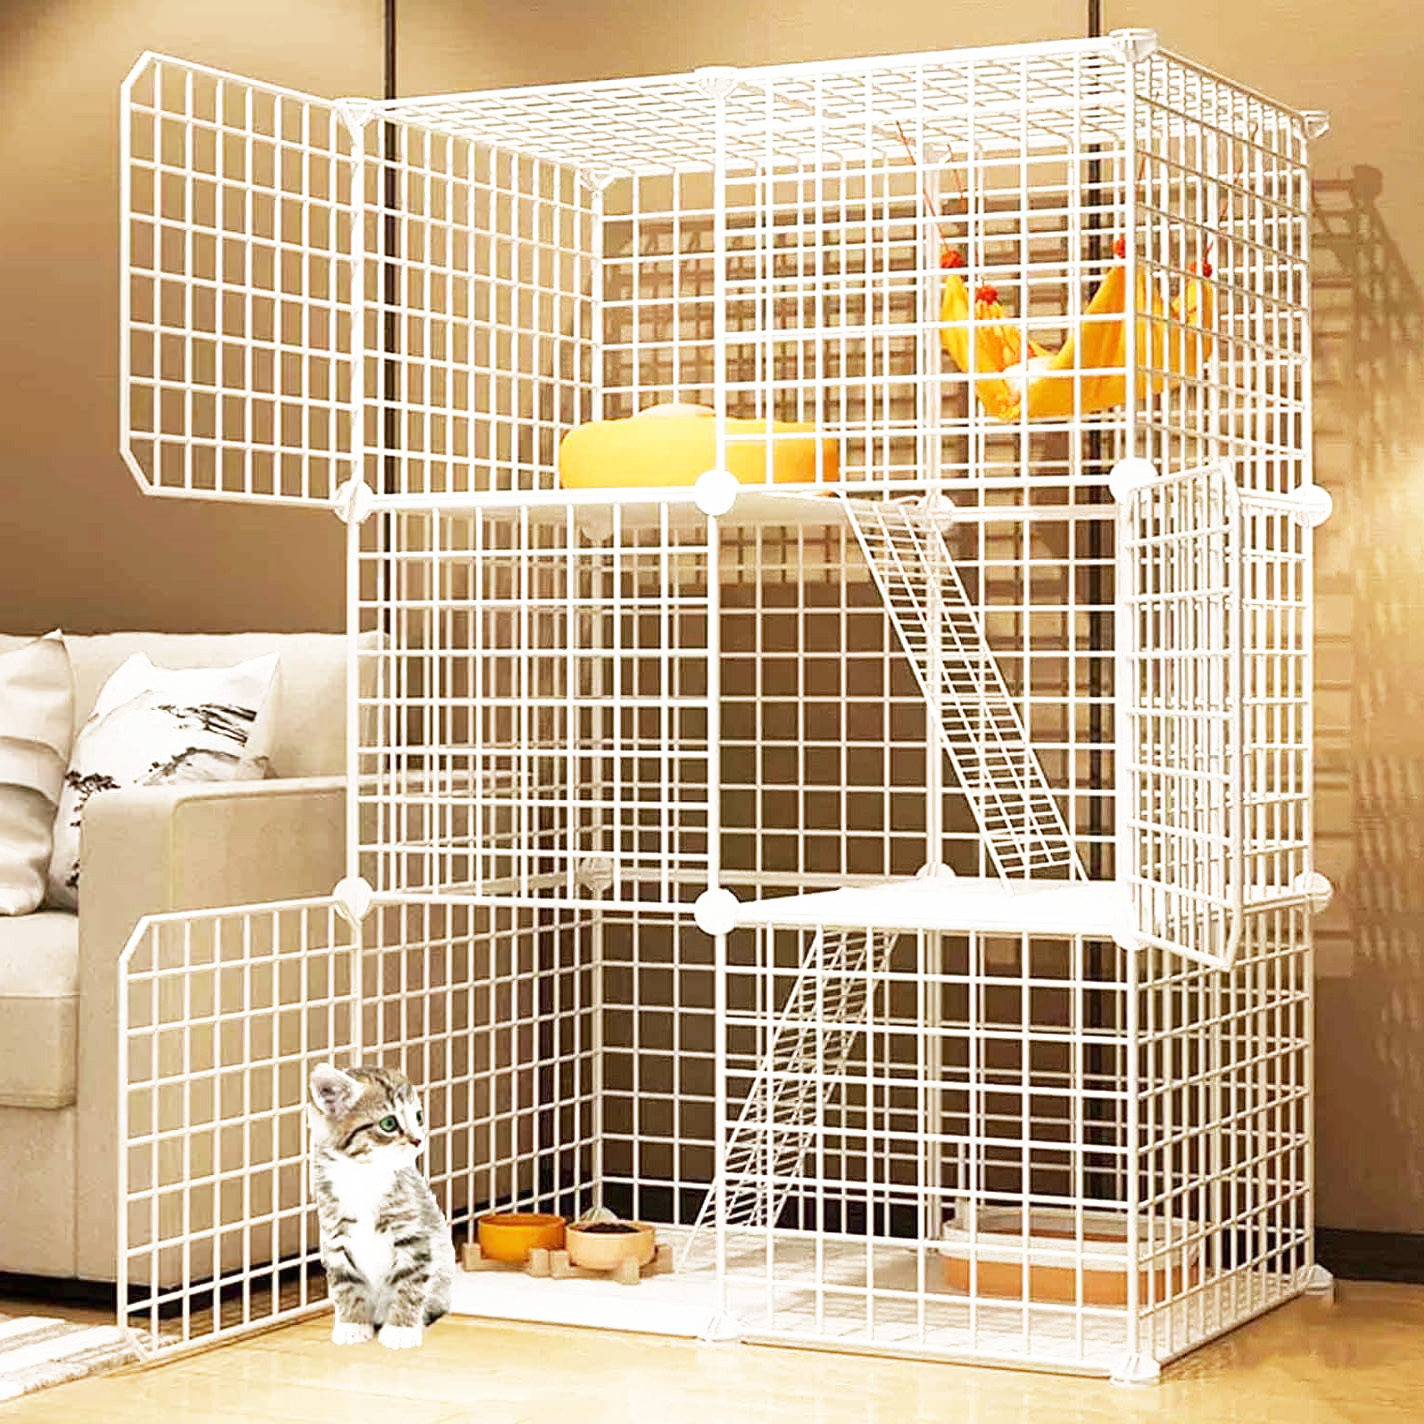 Large Pet Home Cat Cage Detachable Metal Wire Kennel Playpen Exercise Crate (White)